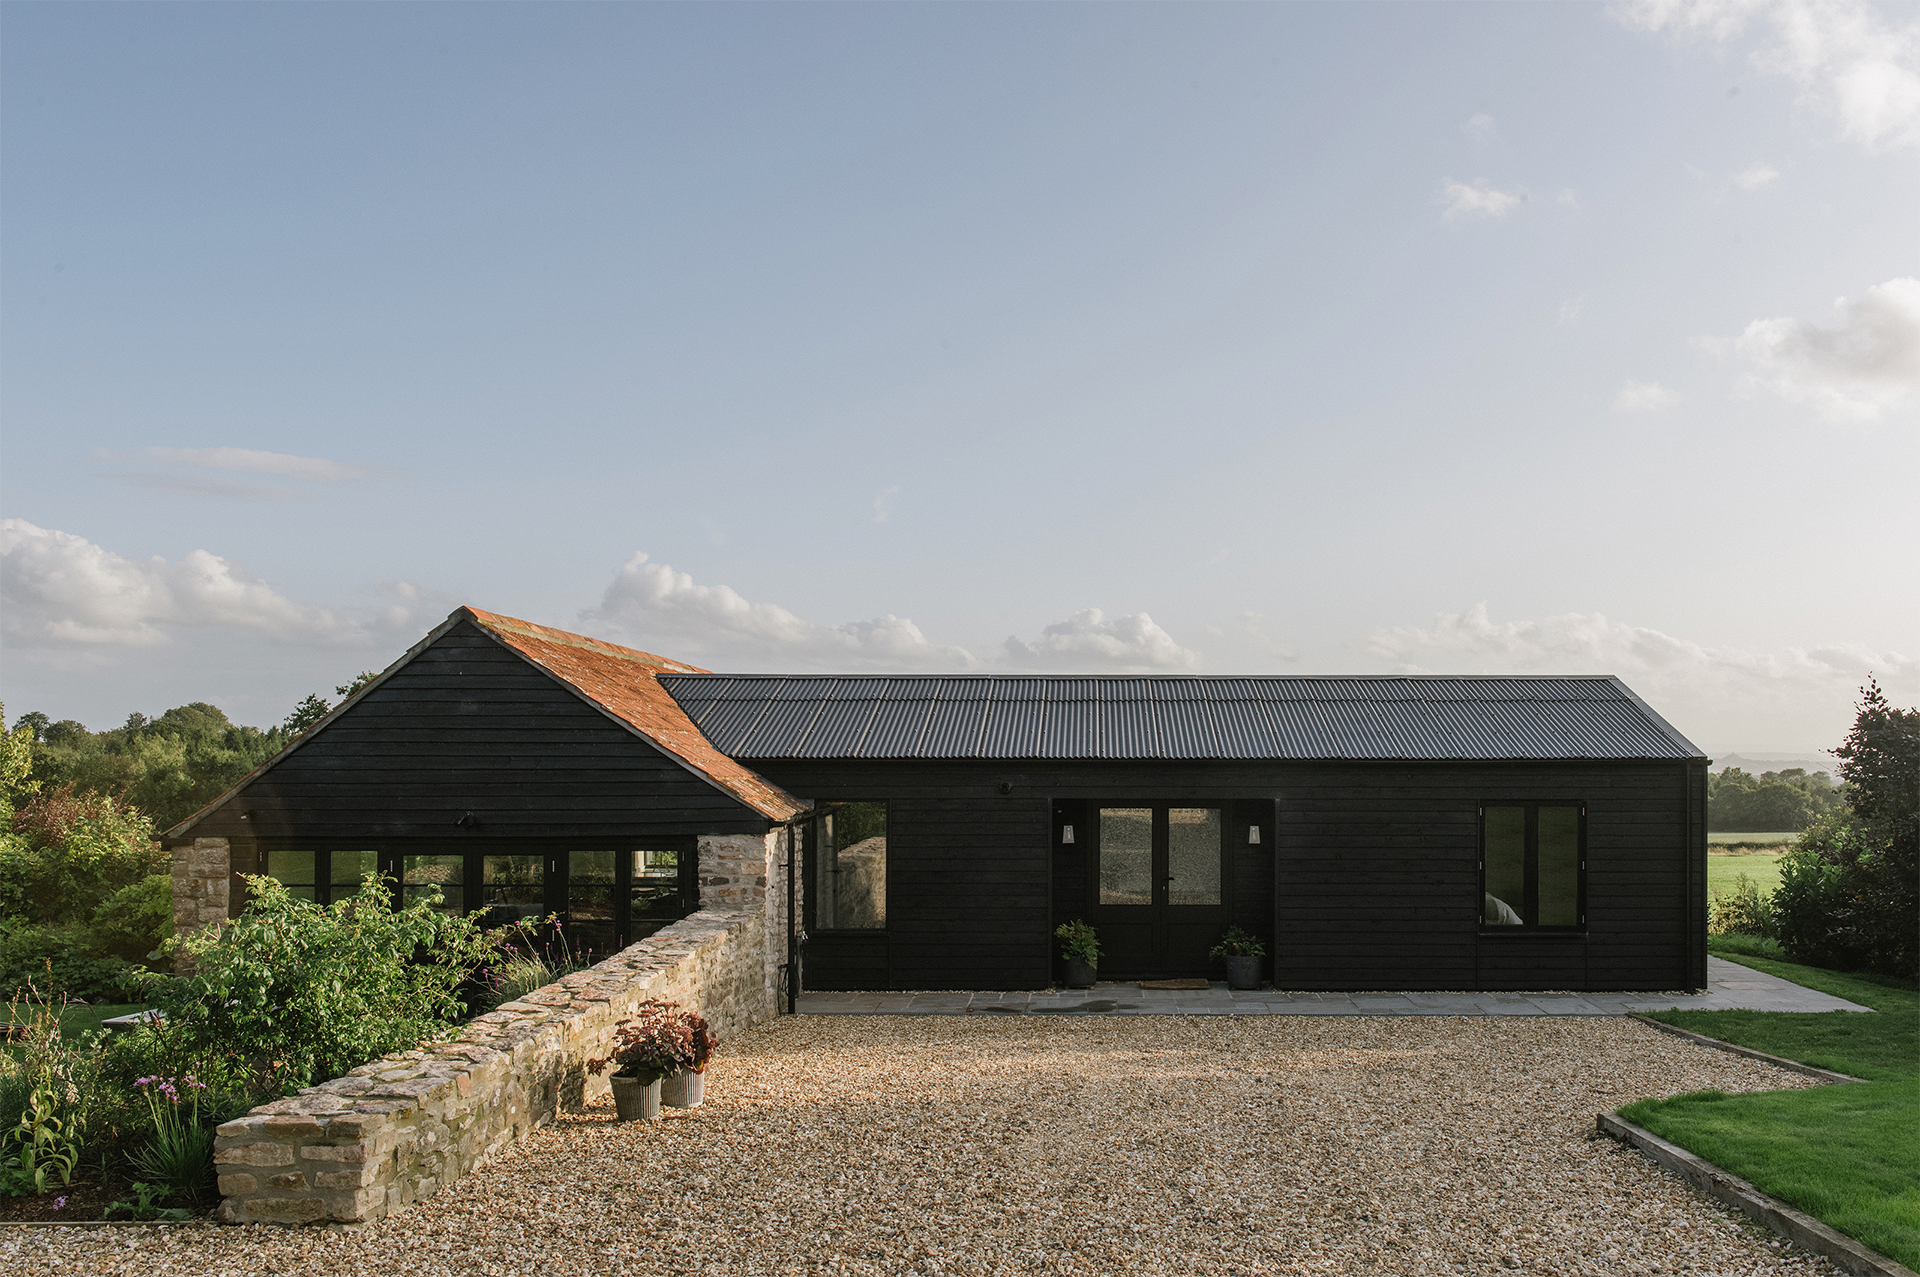 Explore a Charming English Barn Paired with a Timbre Clad Guesthouse